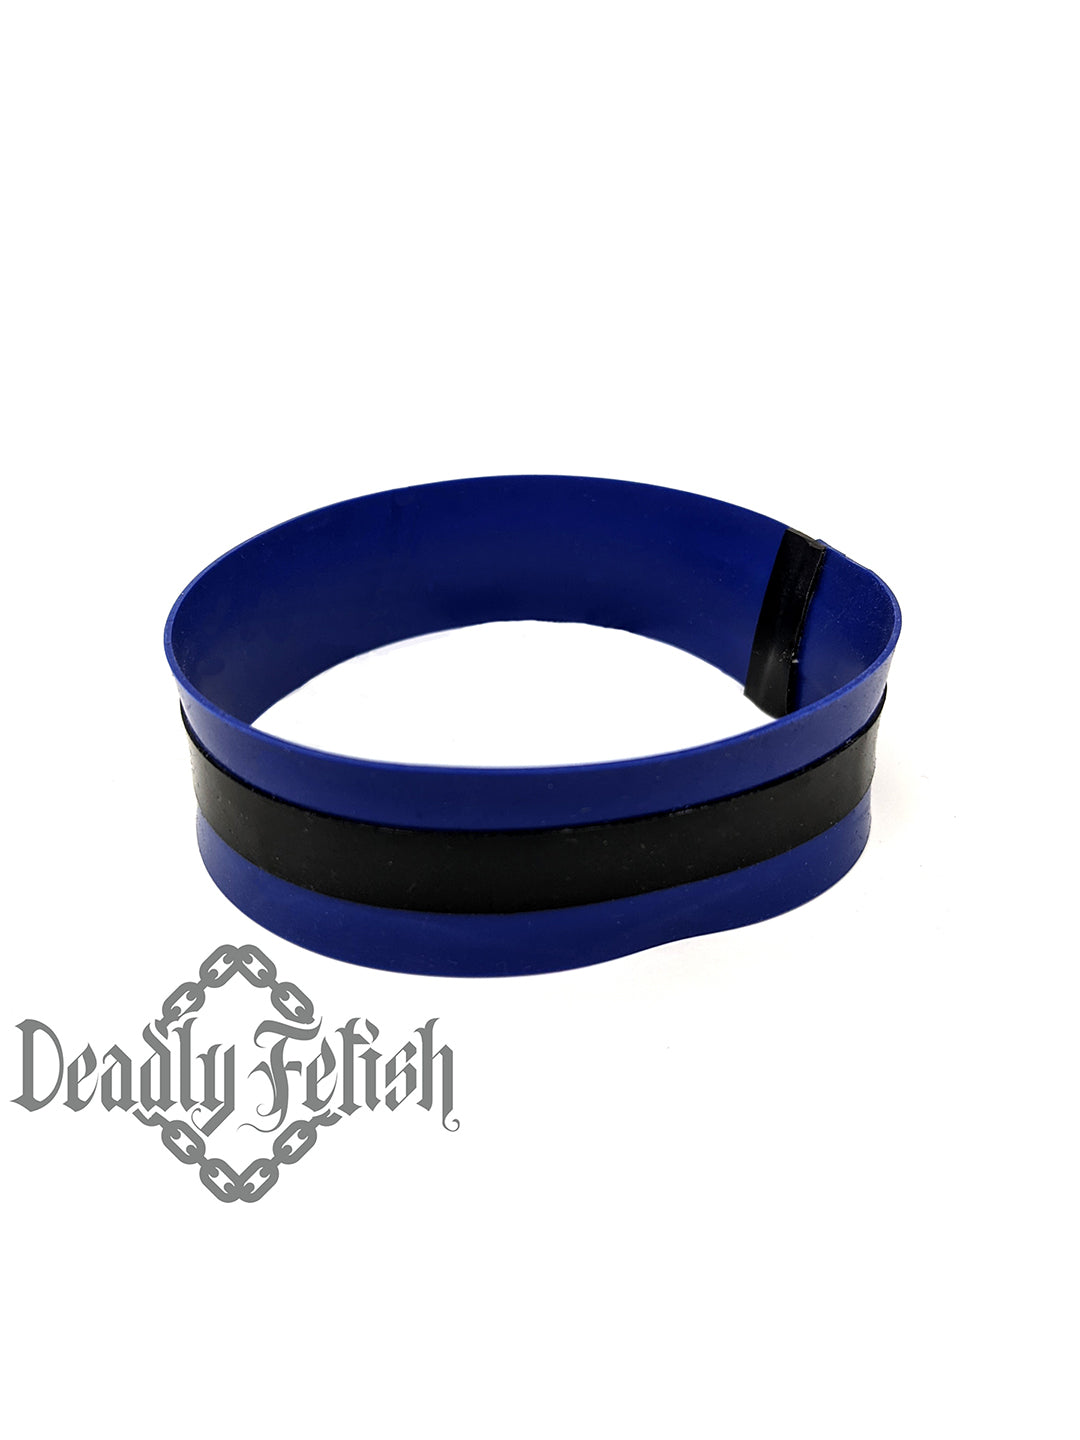 Deadly Fetish Latex: Arm Bands